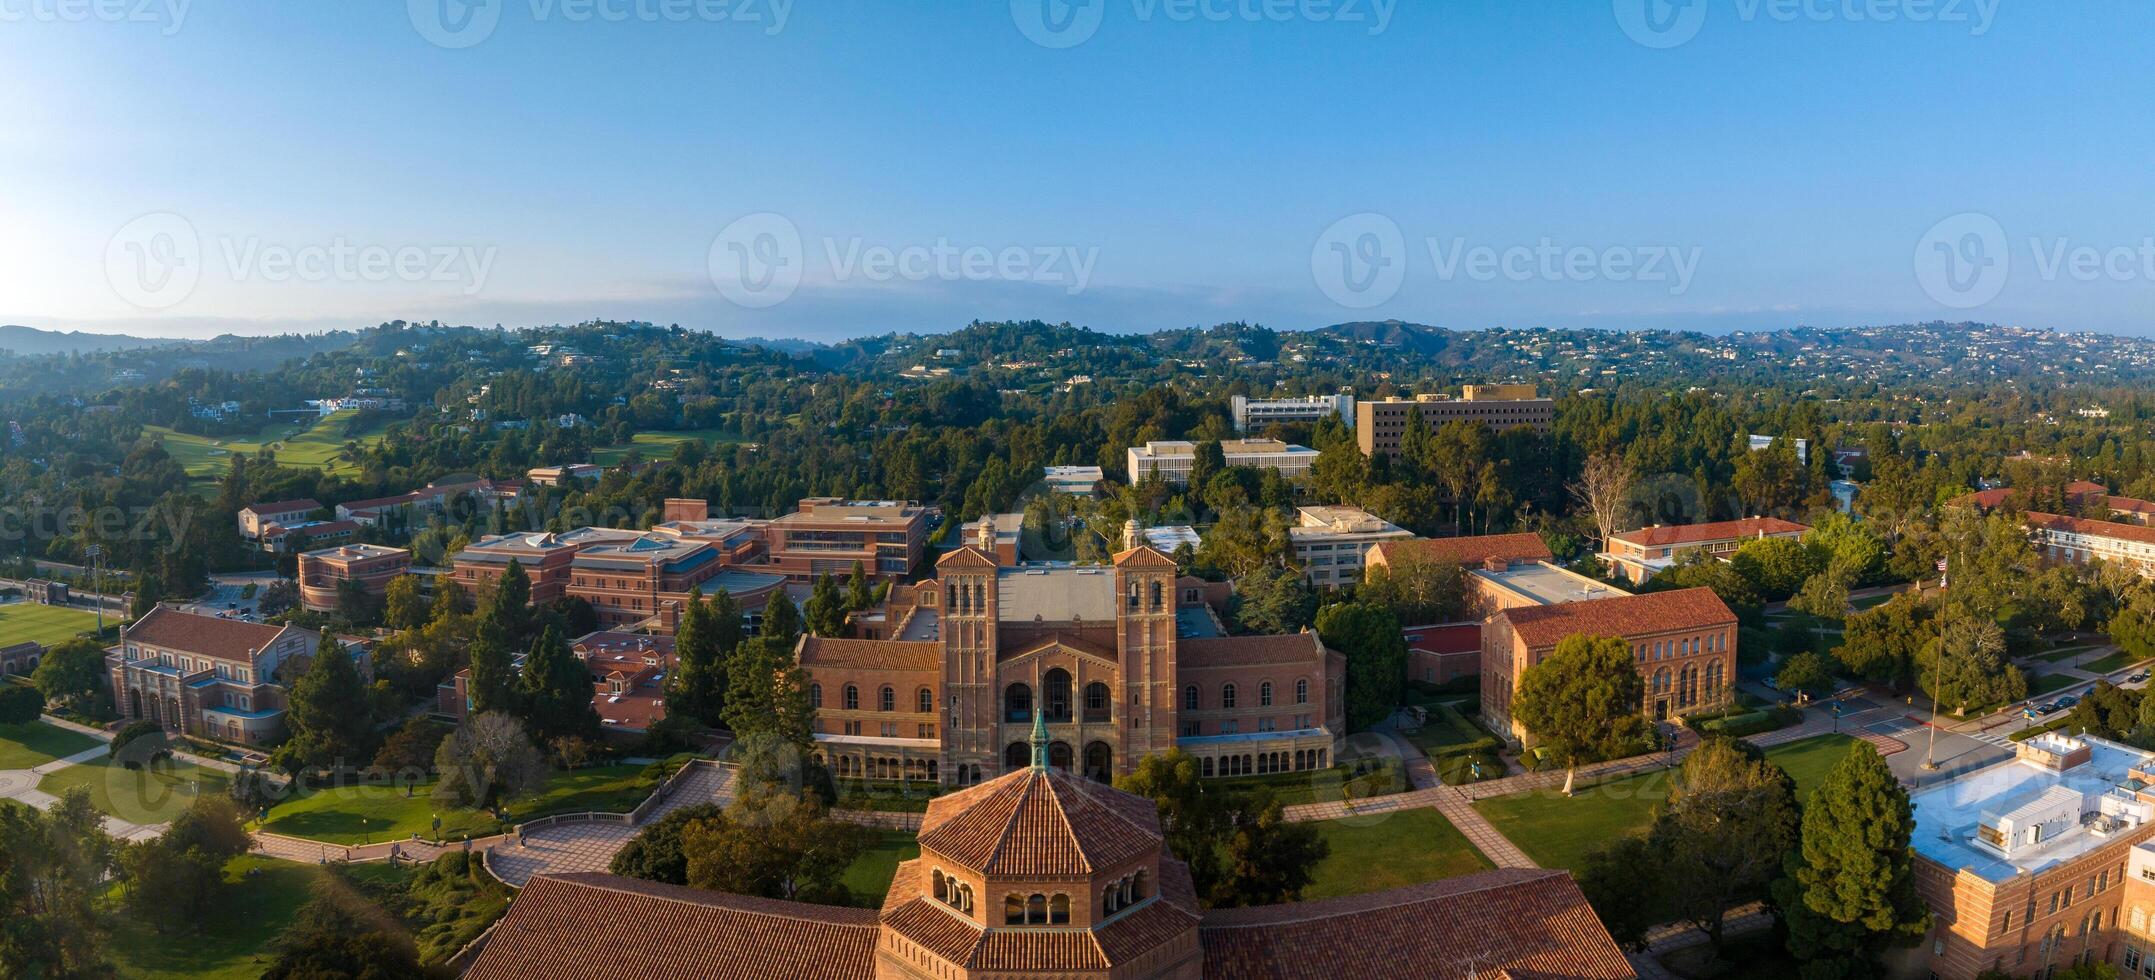 Aerial View of UCLA Campus in Westwood, Los Angeles with Red-Brick Buildings and Lush Greenery on Sunny Day photo